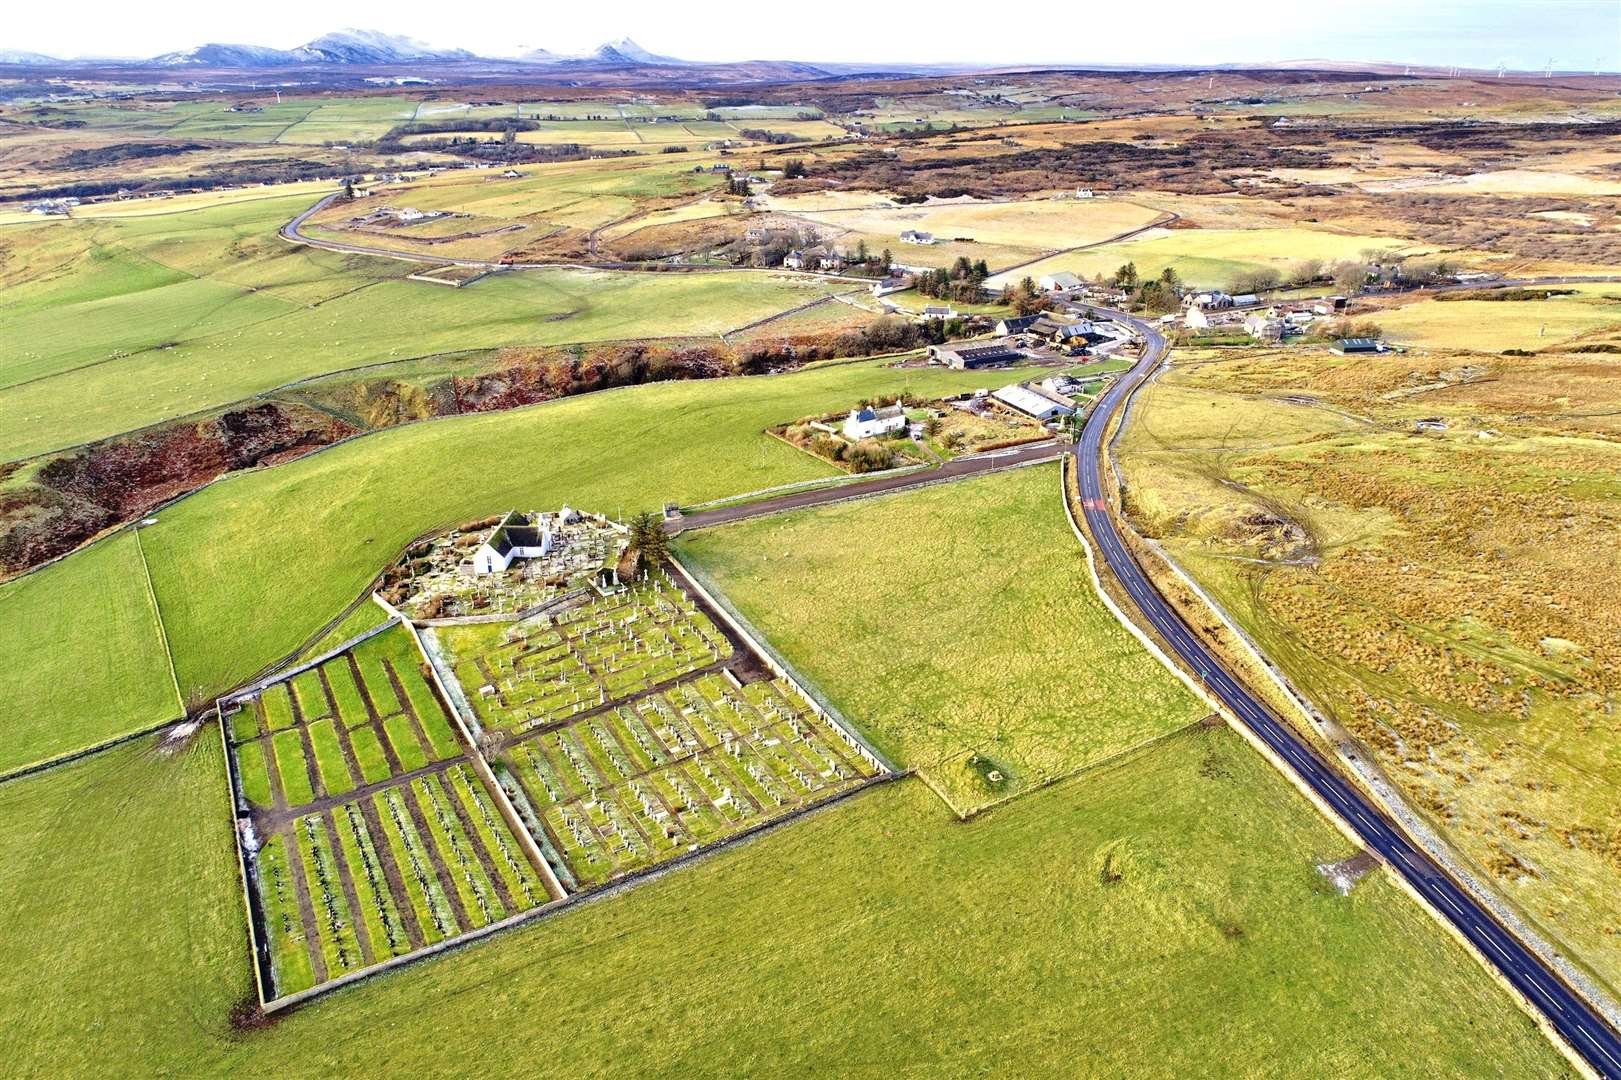 The cemetery at Latheron and the landscape beyond looking south.